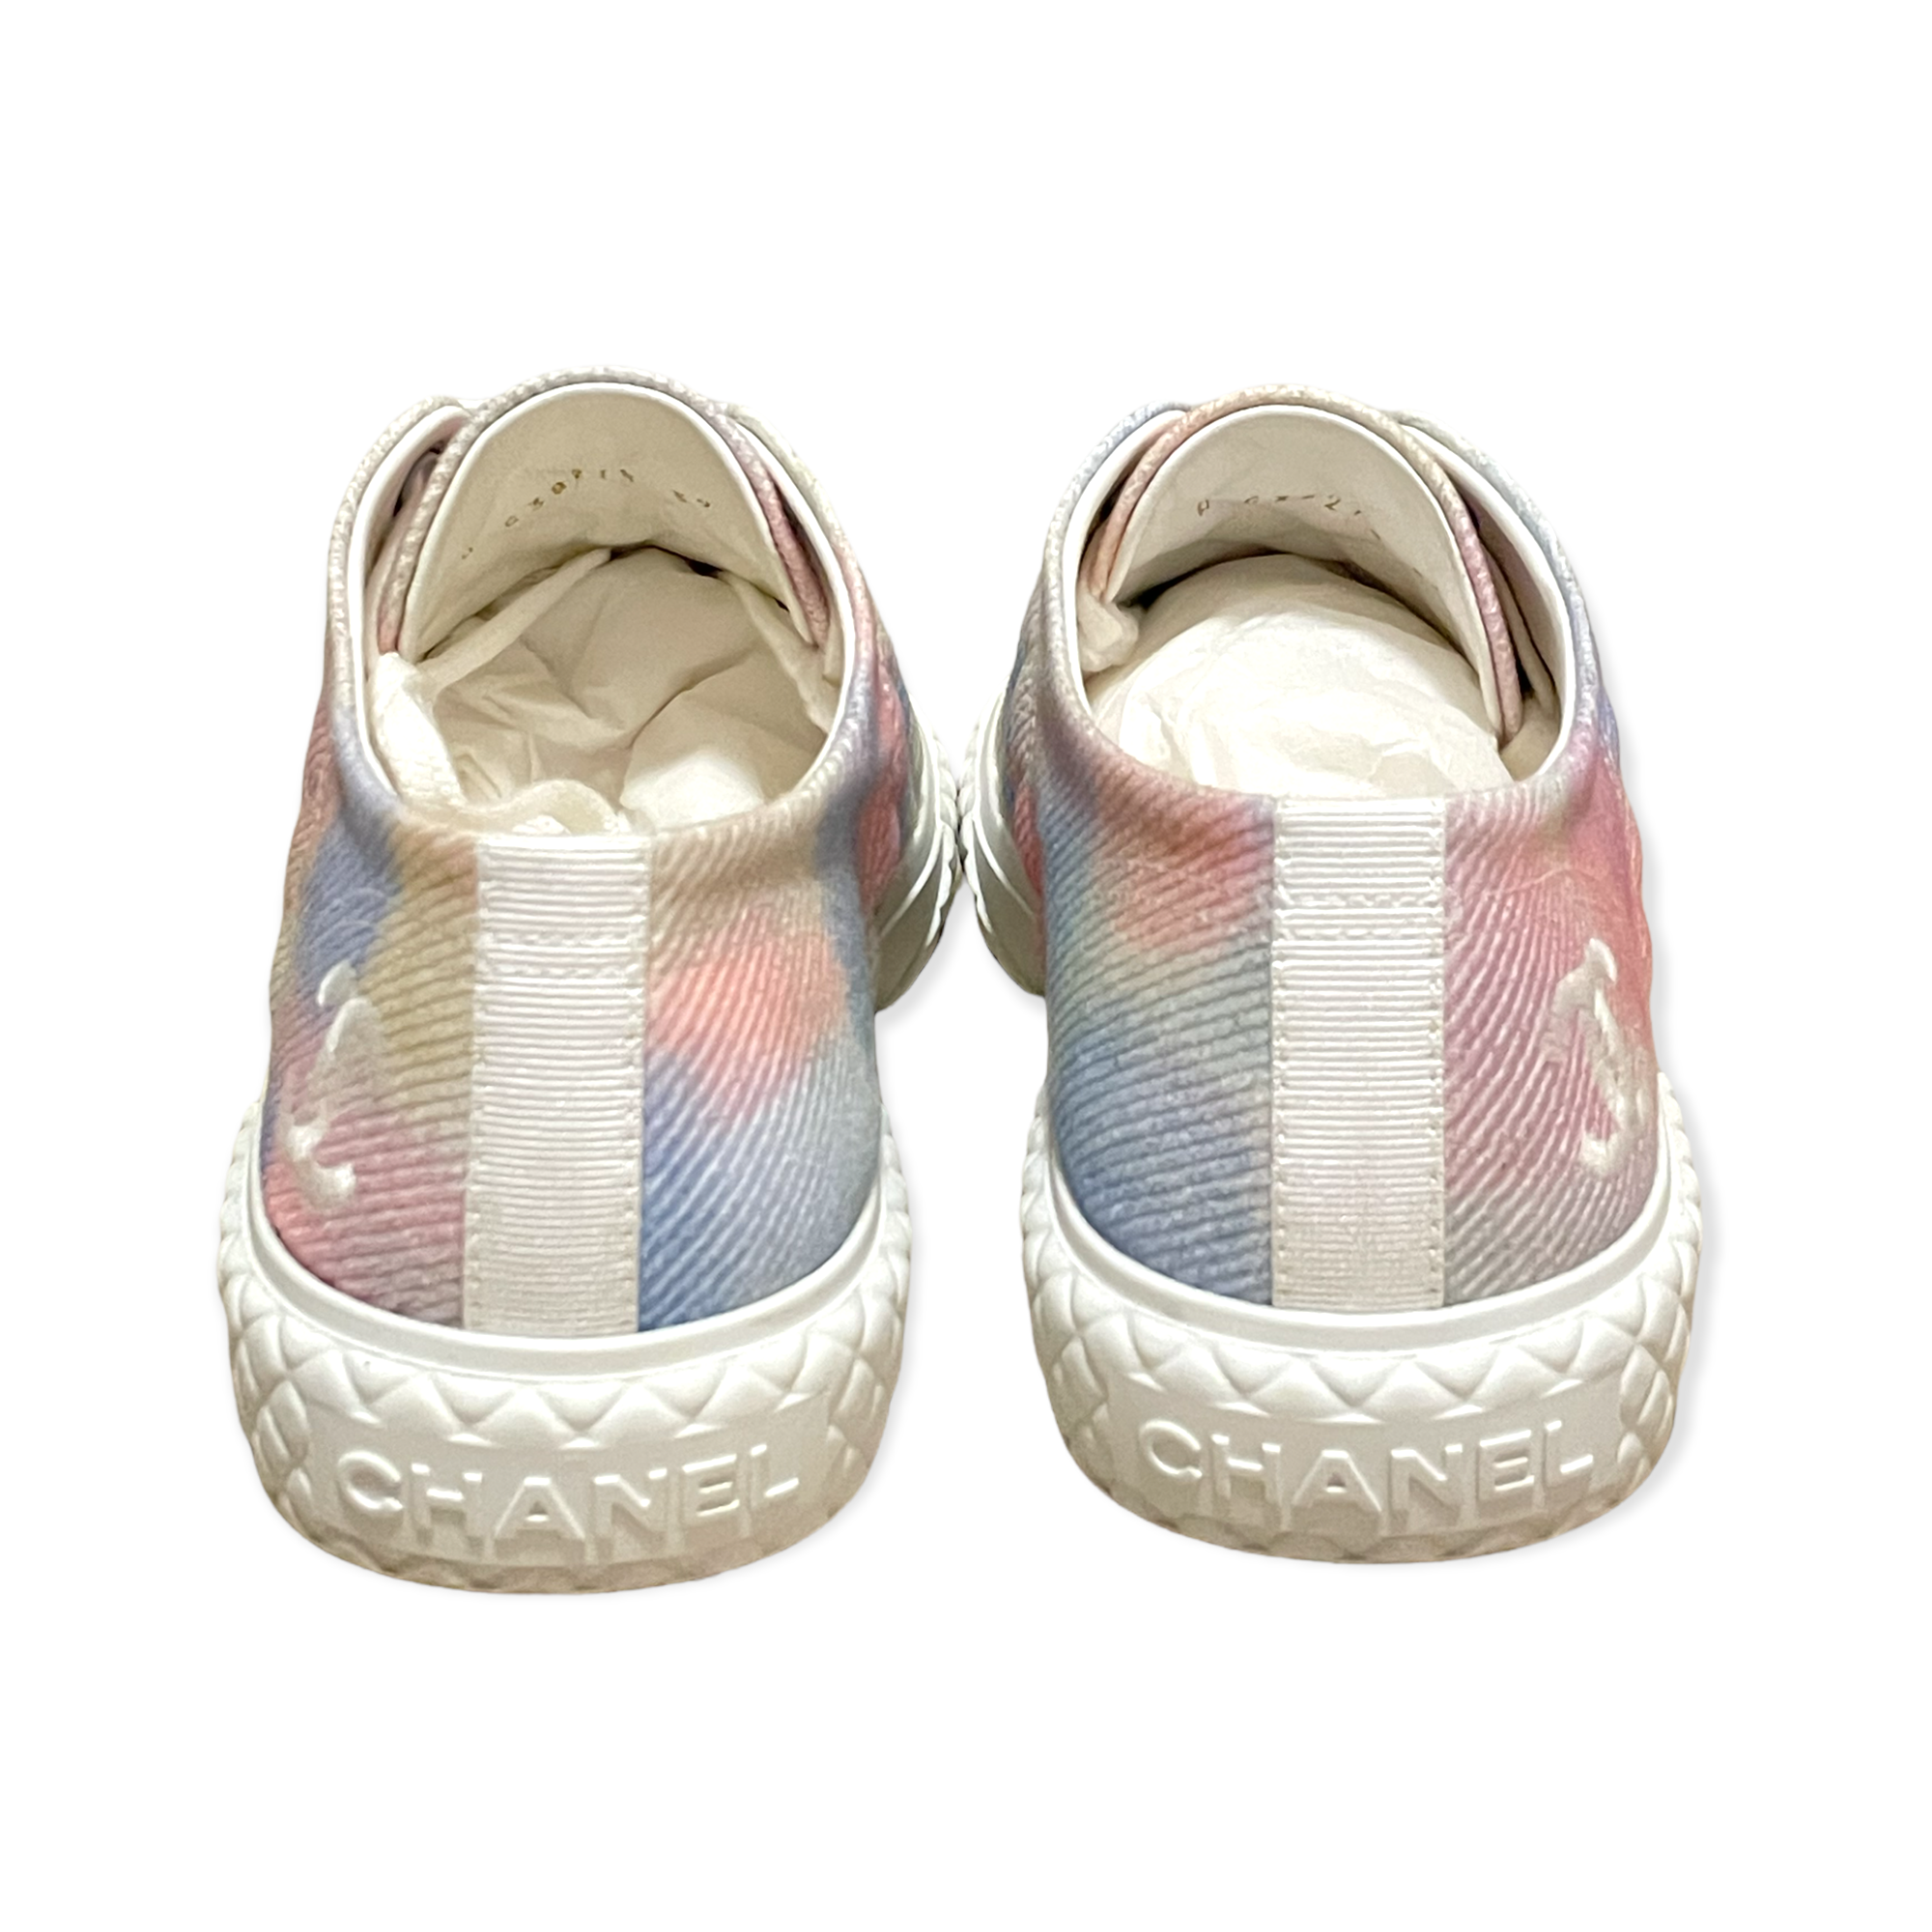 CHANEL 22C Printed Fabric Green, Pink, Blue & White Sneakers |Size:39|